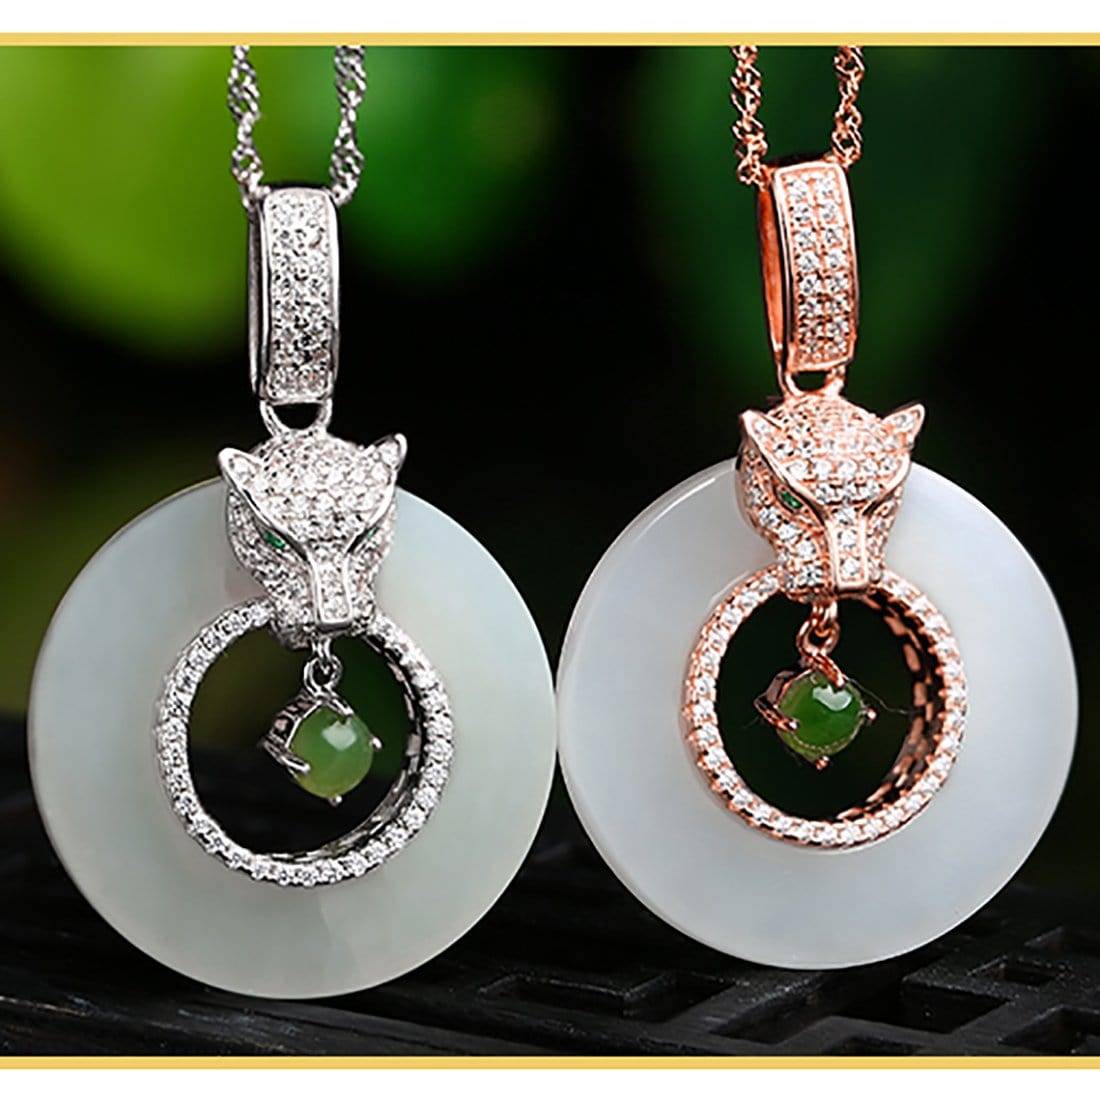 Baikalla Jewelry Silver Jade Necklace Genuine Green and White Nephrite Jade Leopard Necklace with CZ(Rose Gold Plated or Silver)